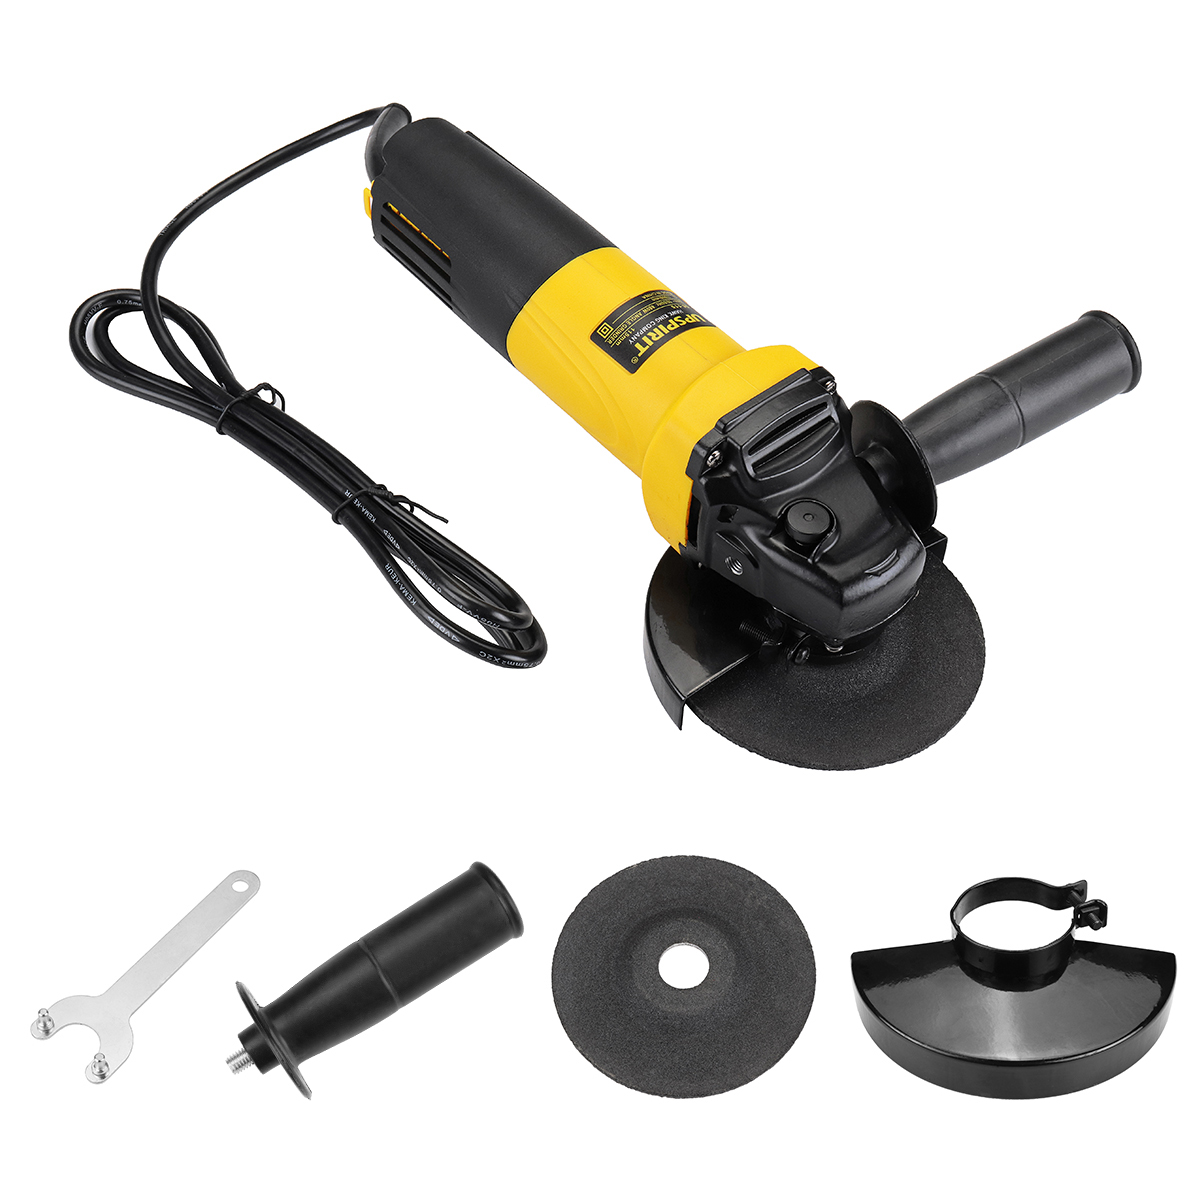 AC220V-880W-Electric-Angle-Grinder-Heavy-Duty-Sanding-Cutting-Grinding-Machine-Tool-115mm-1405035-5